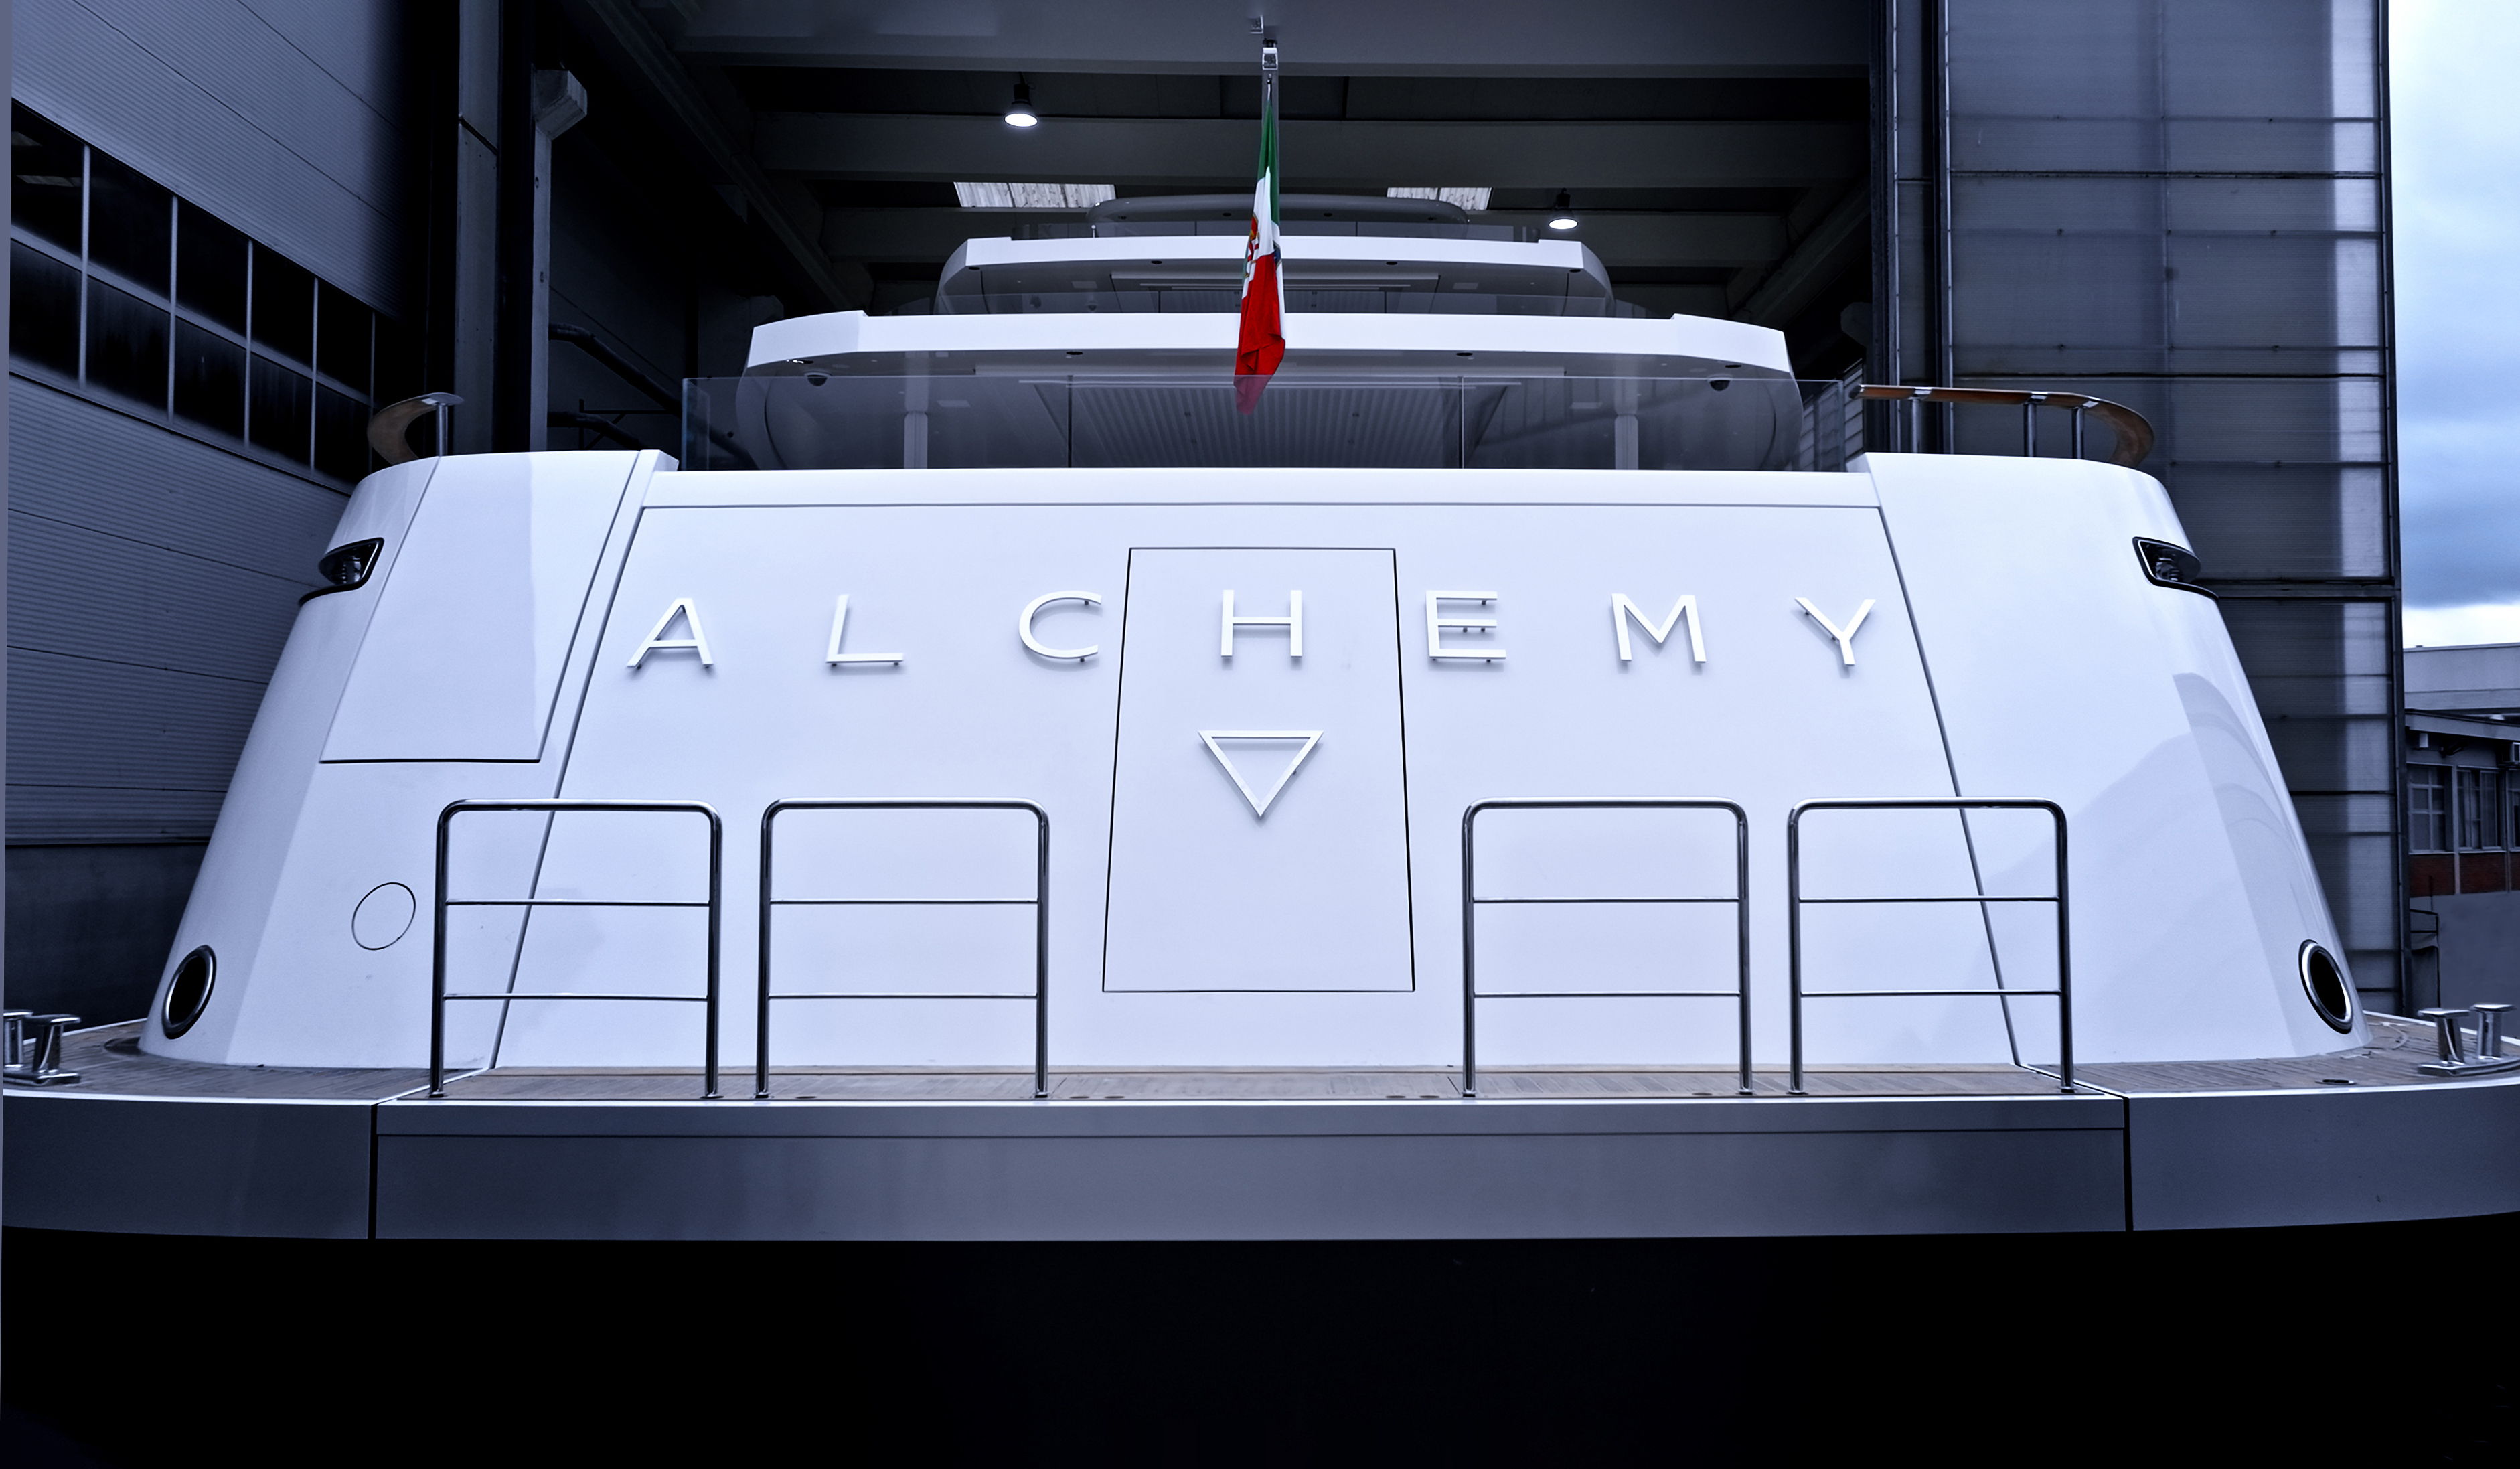 Rossinavi’s Alchemy, designed by Vitruvius Yachts with interior styling by Enrico Gobbi - Team for Design